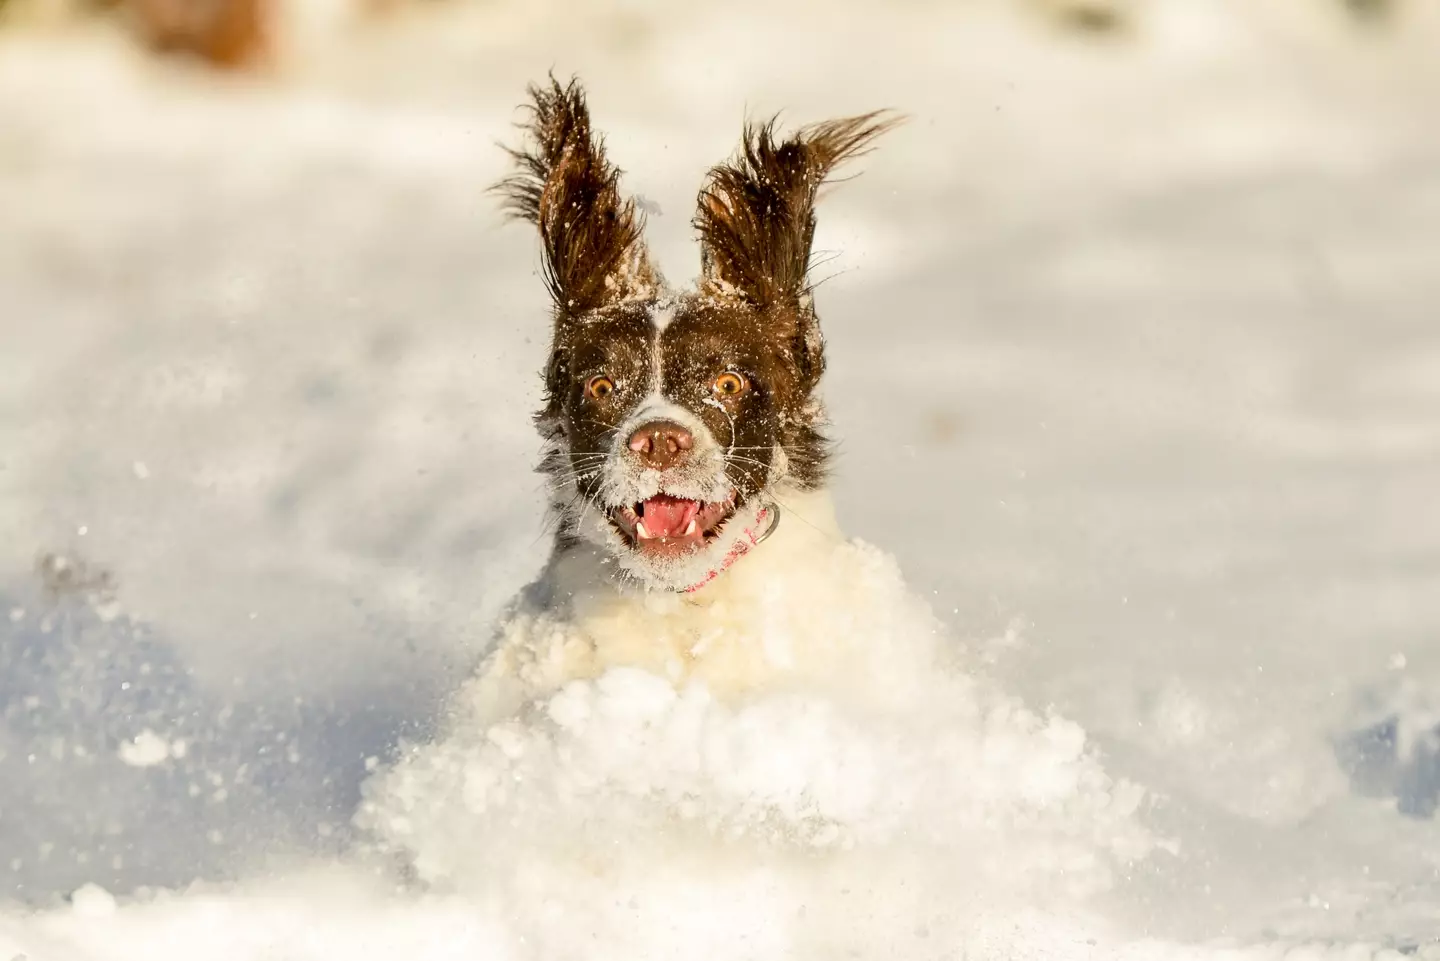 This might make you think twice about walking your dog in the snow.